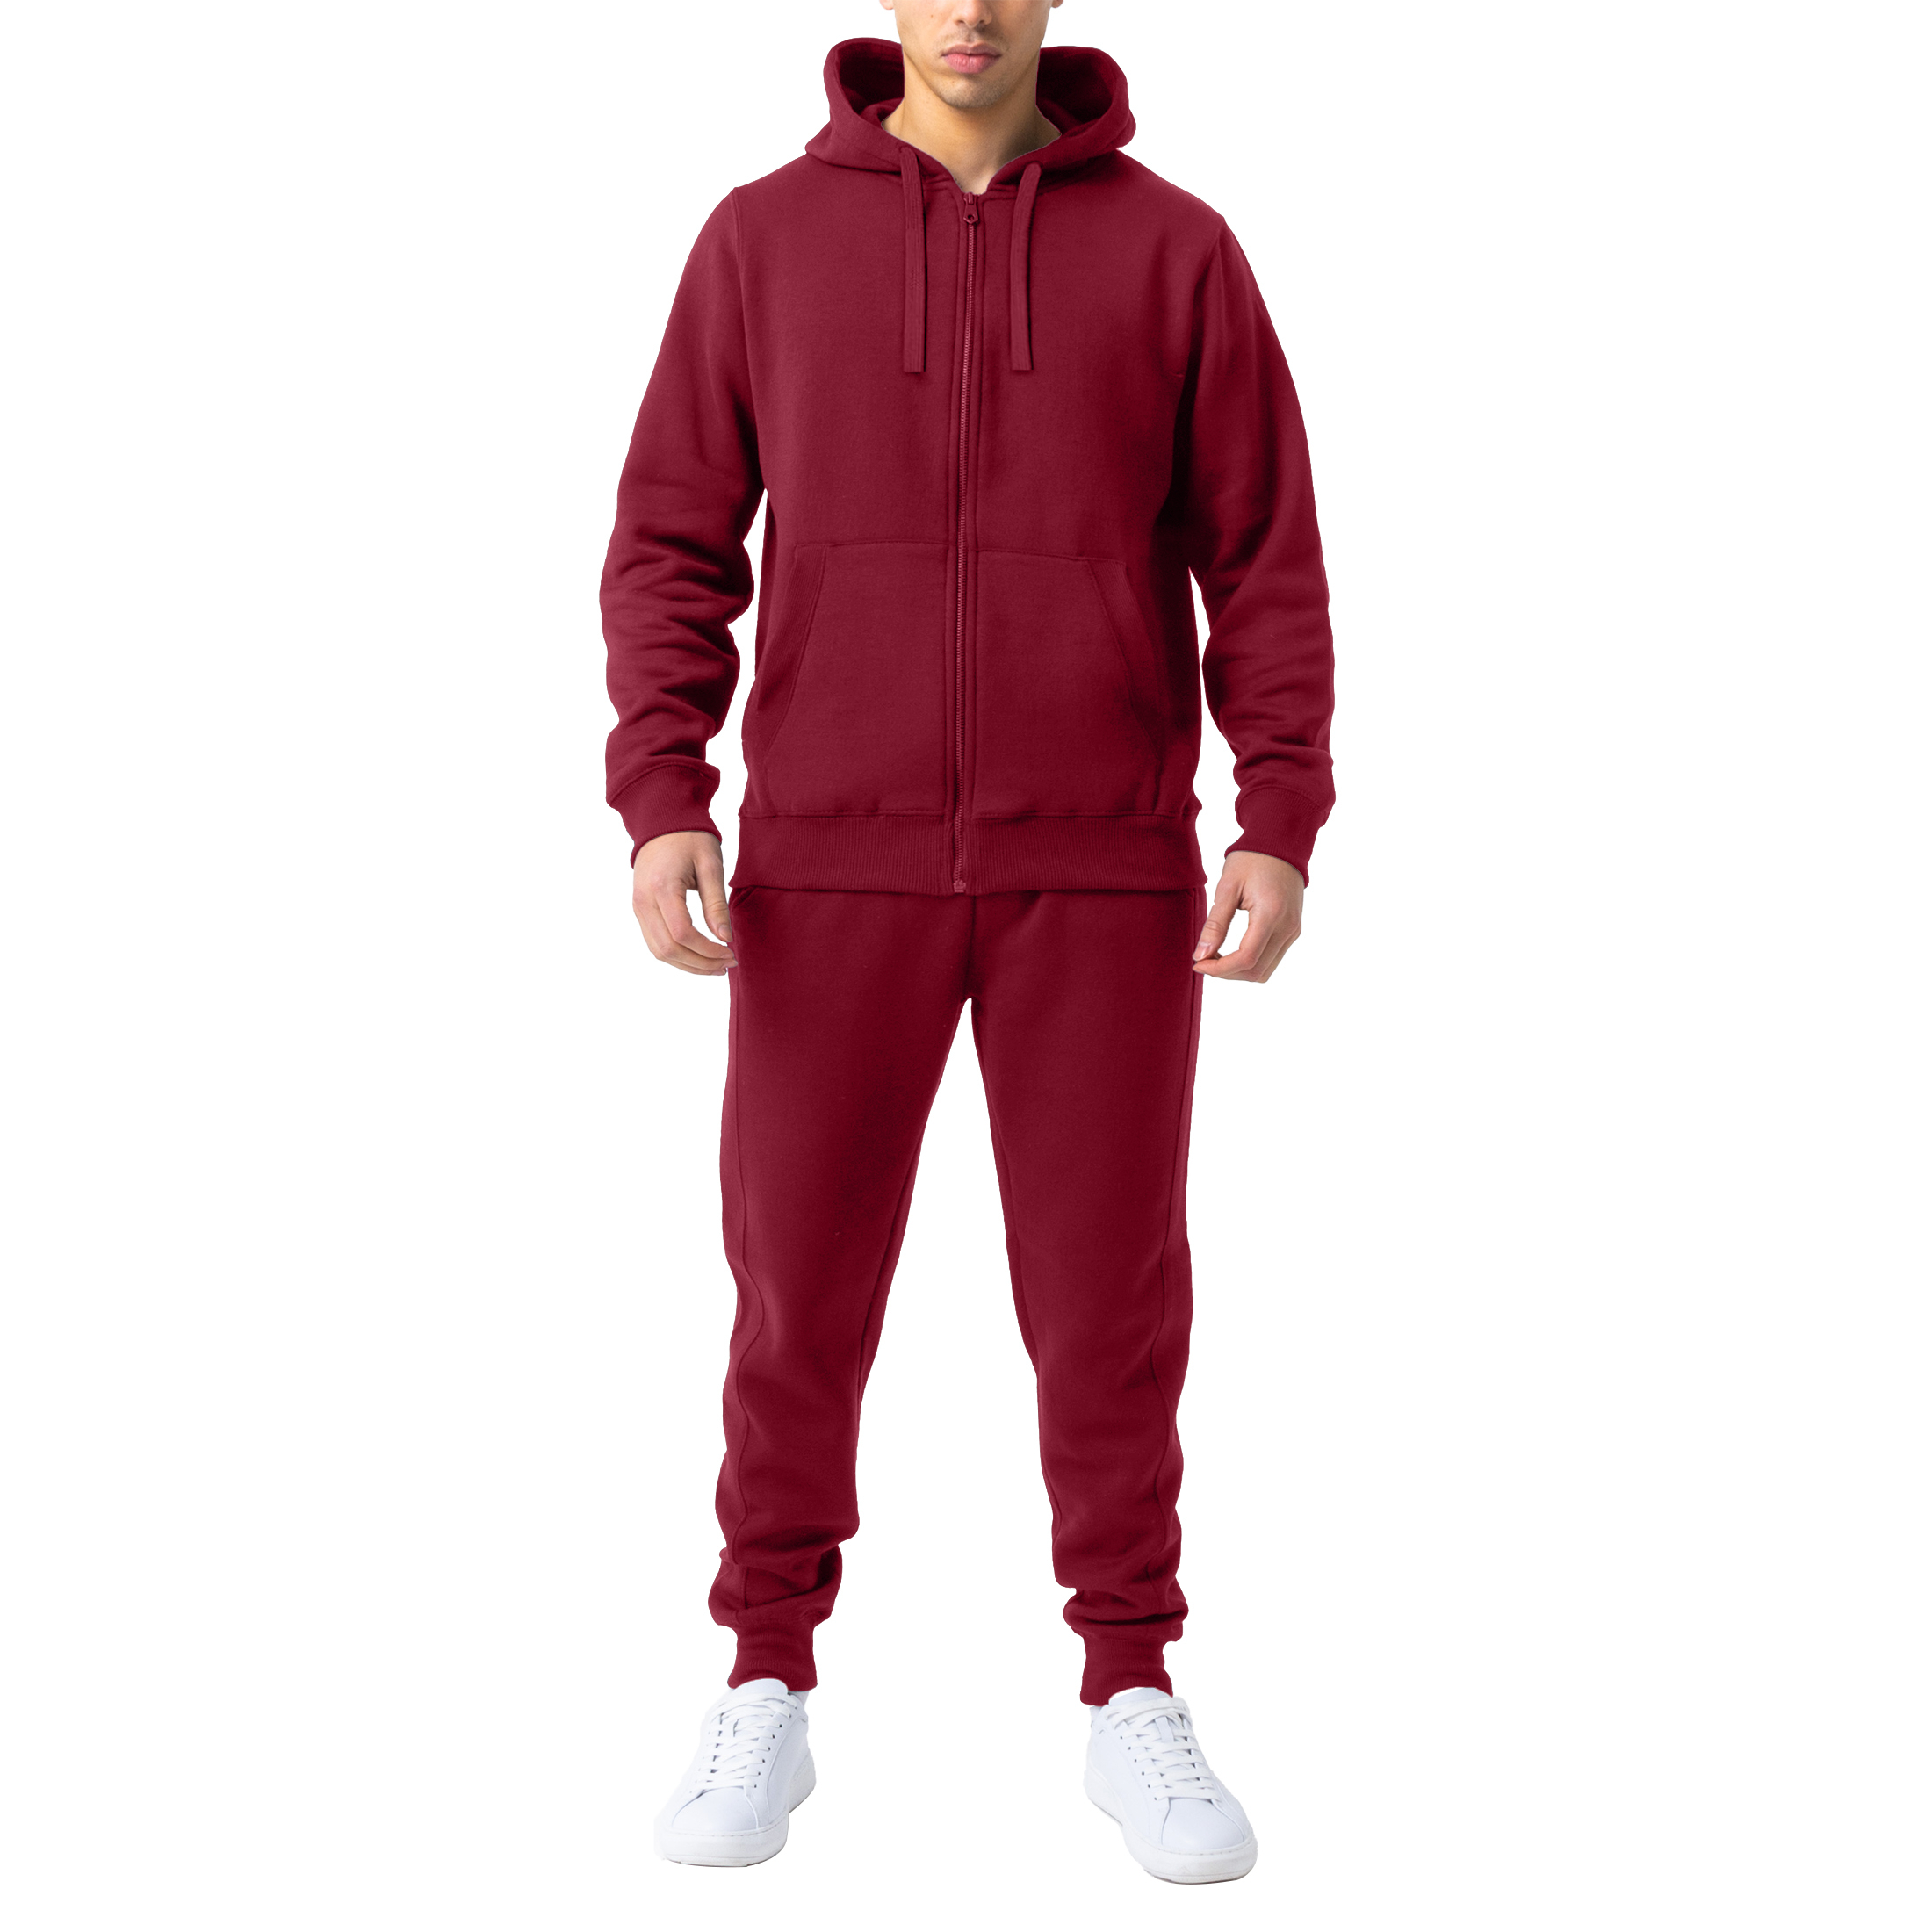 Men's Casual Jogging Athletic Active Full Zip Up Tracksuit - Red, Small